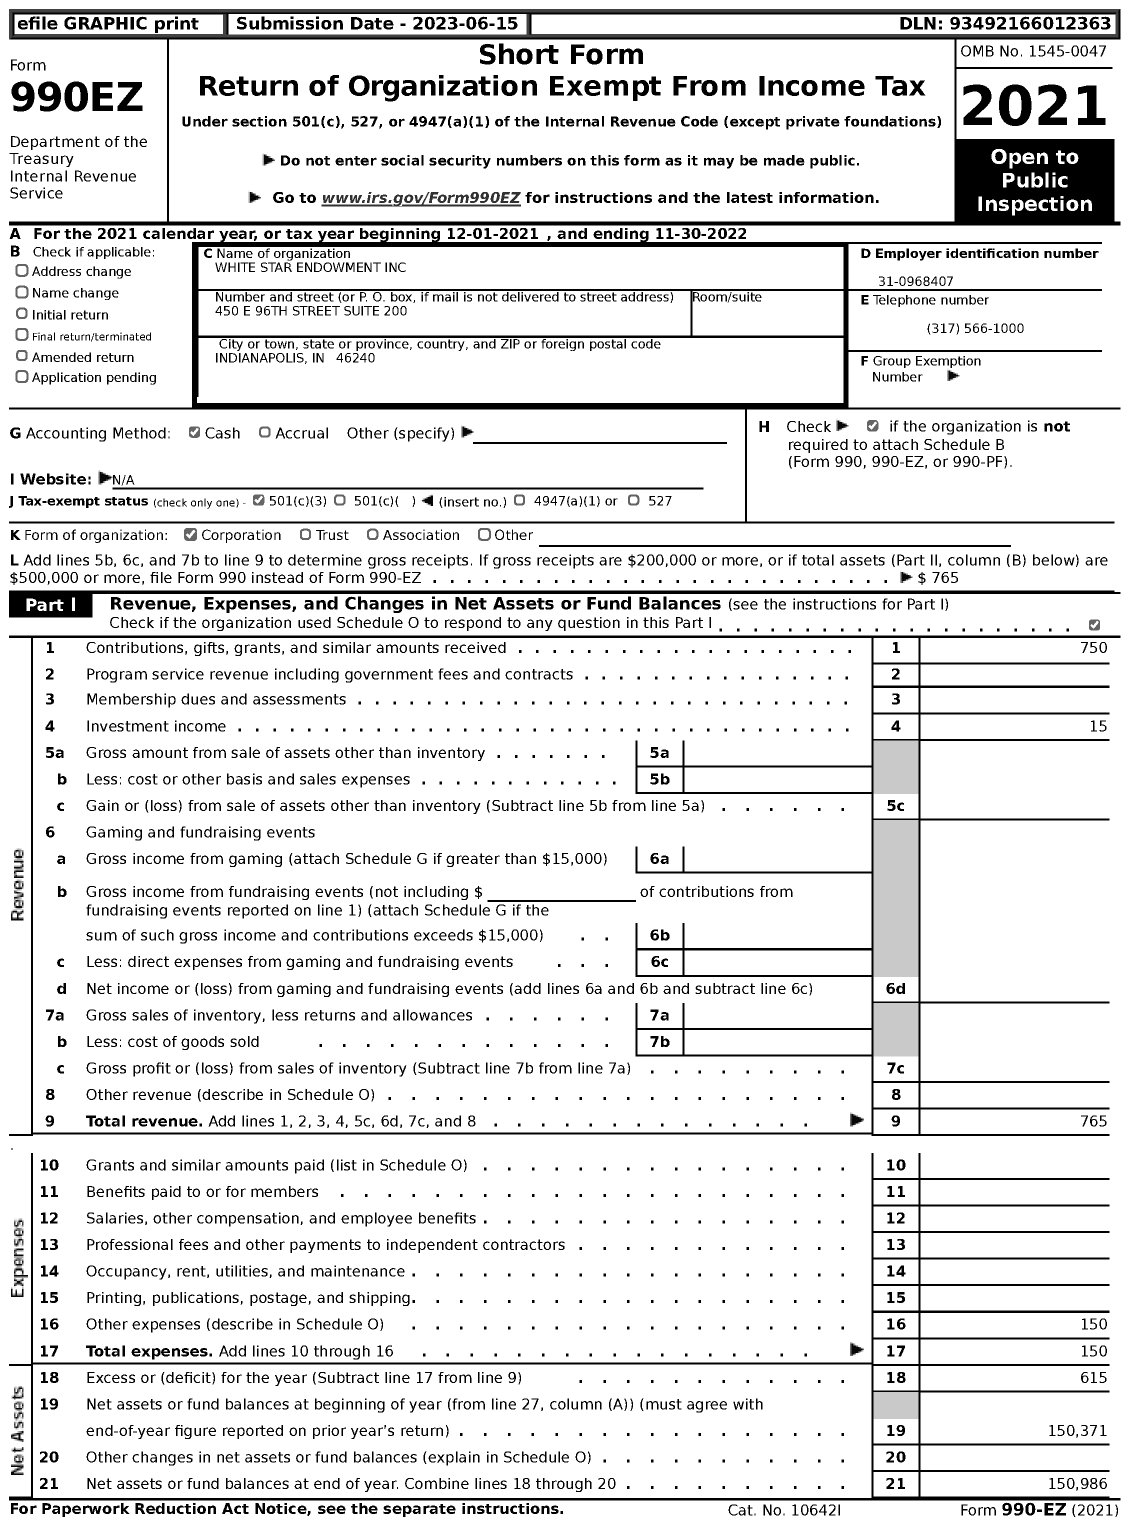 Image of first page of 2021 Form 990EZ for White Star Endowment